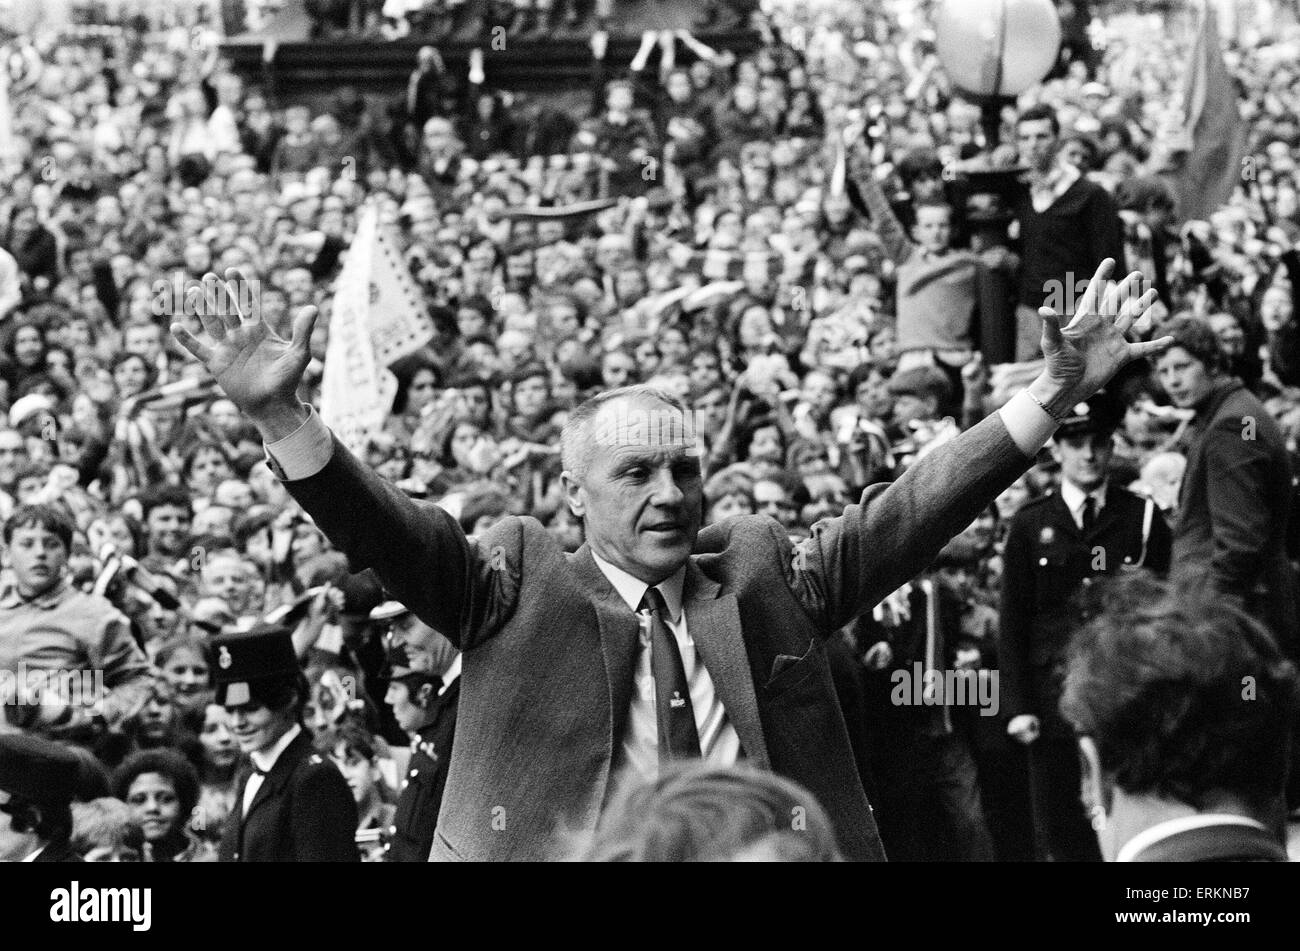 Liverpool manager Bill Shankly pictured on his side's homecoming to the city of Liverpool following their FA Cup Final defeat by Arsenal at Wembley. Thousands of people lined the streets to welcome their heroes back from London. 9th May 1971. Stock Photo